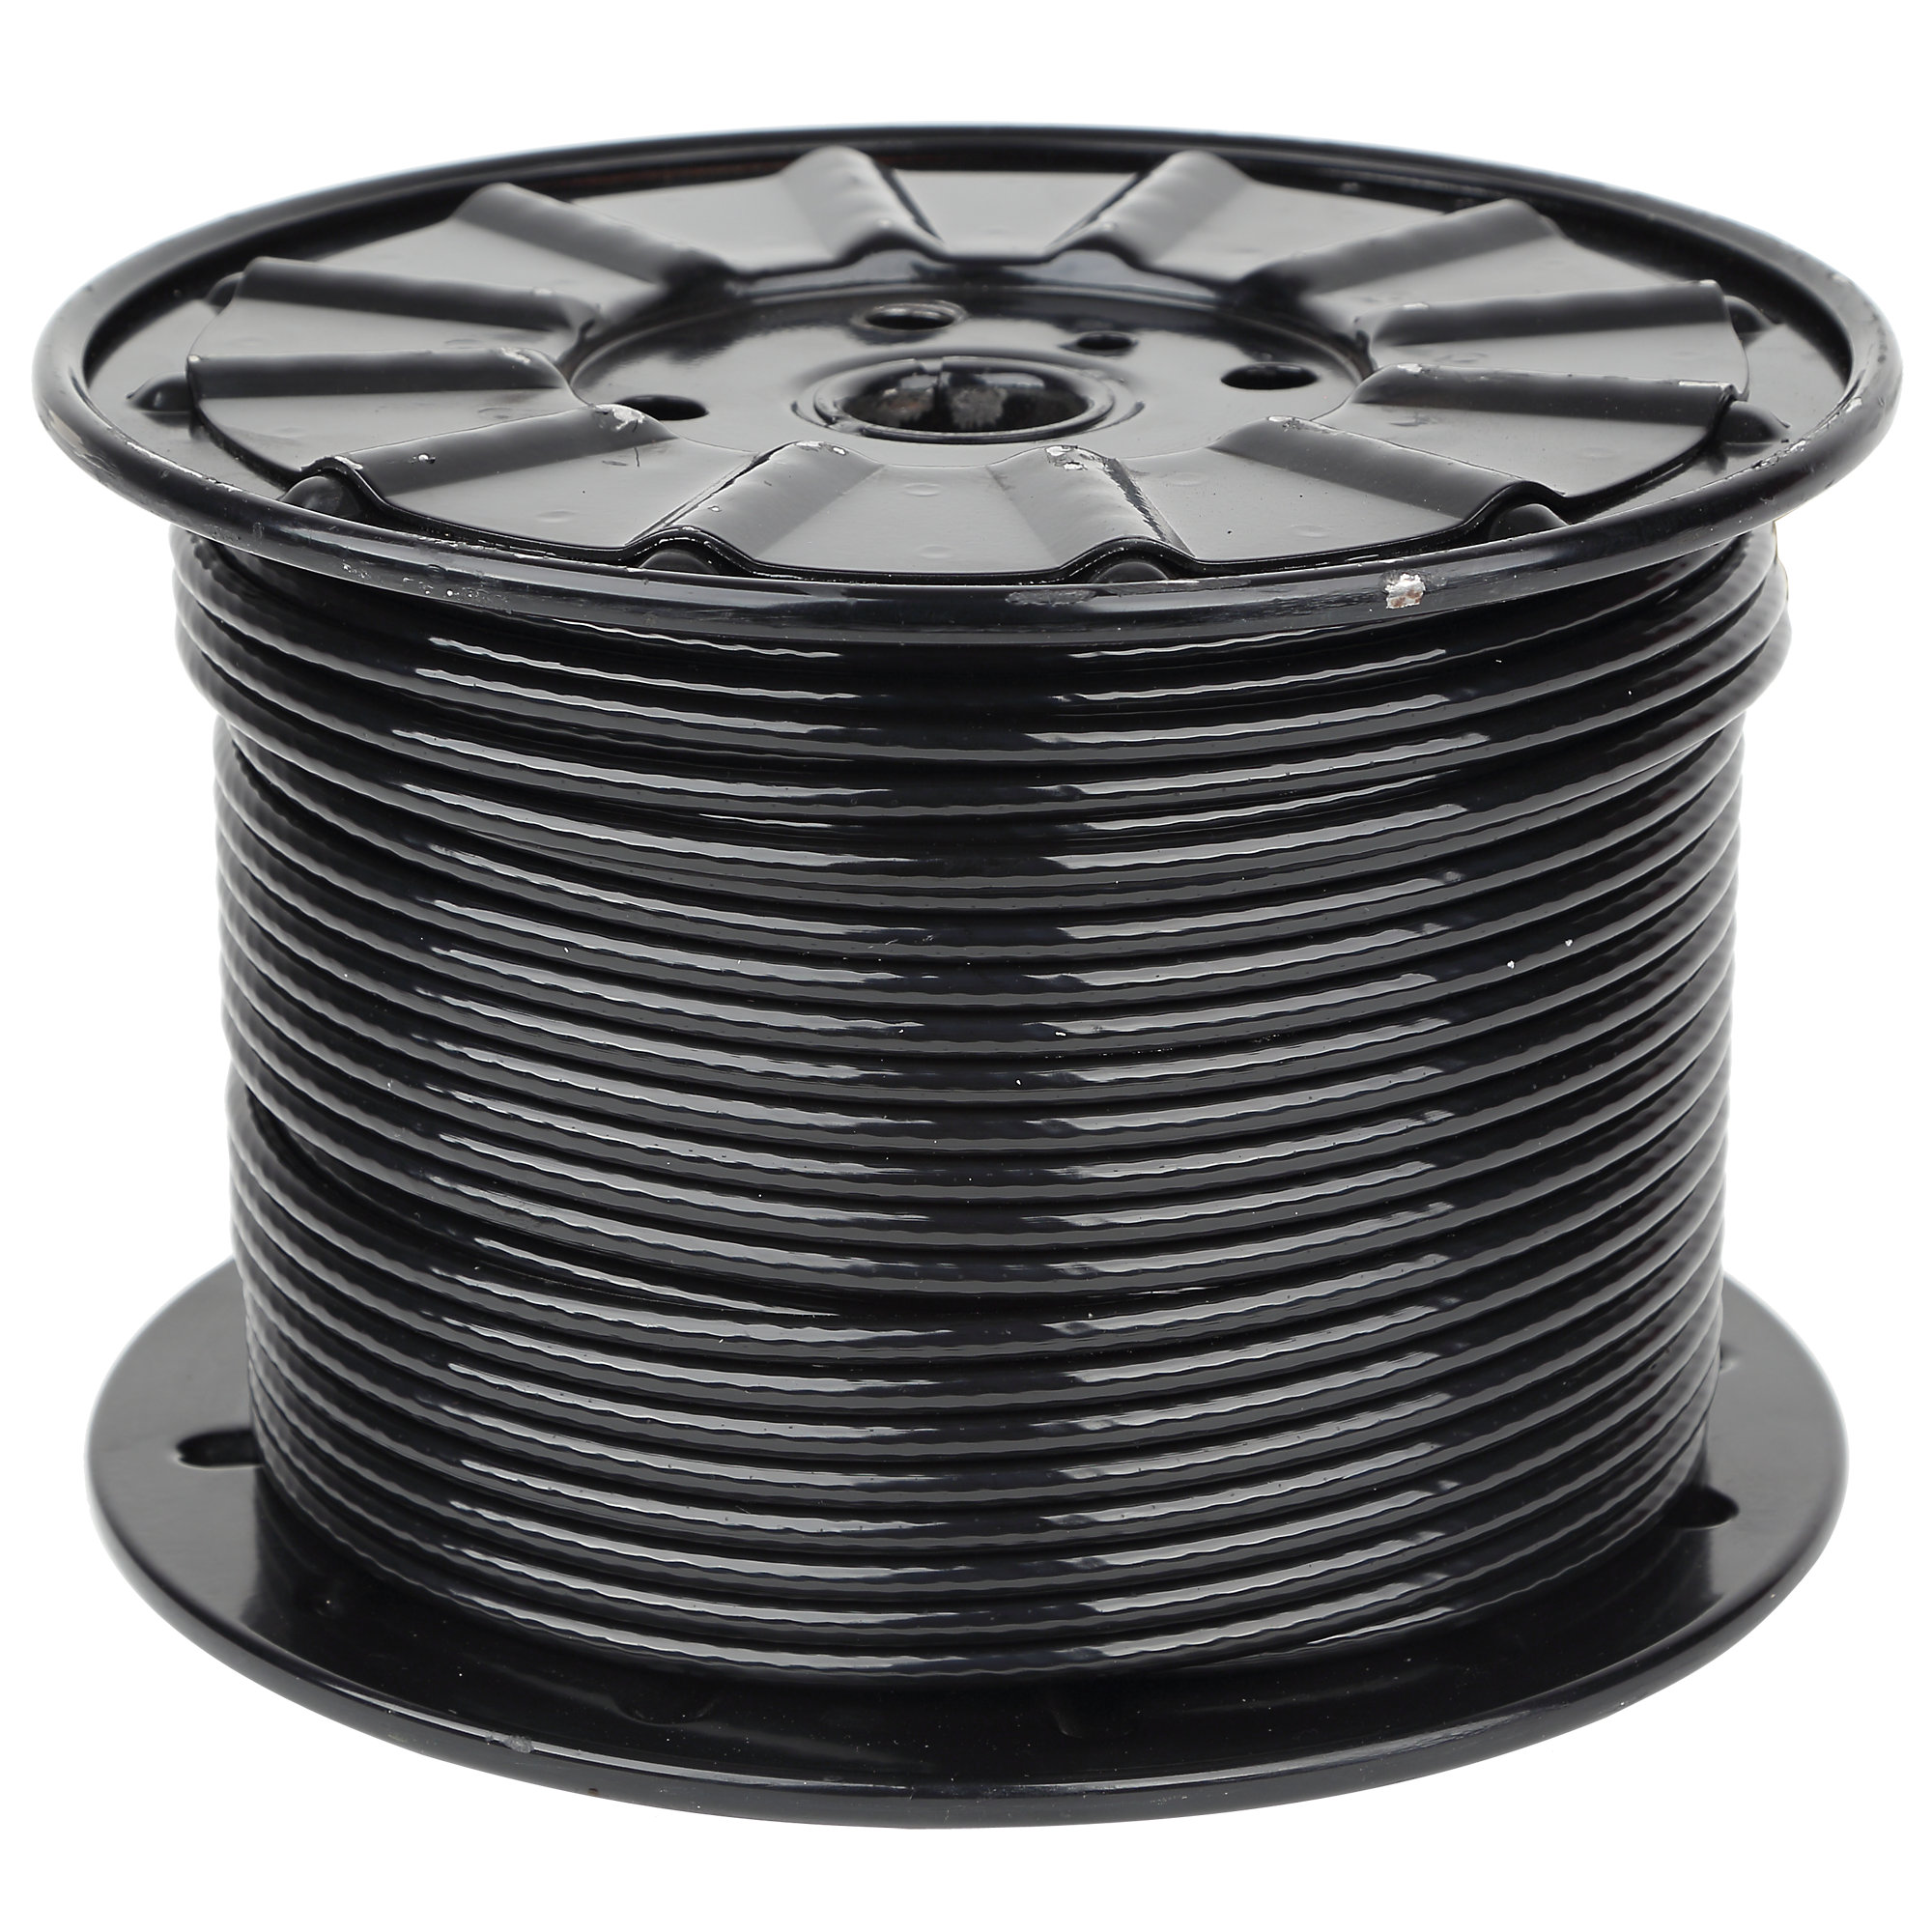 Cable 300FT Reel, 1/4" Diameter with Black Nylon Coating